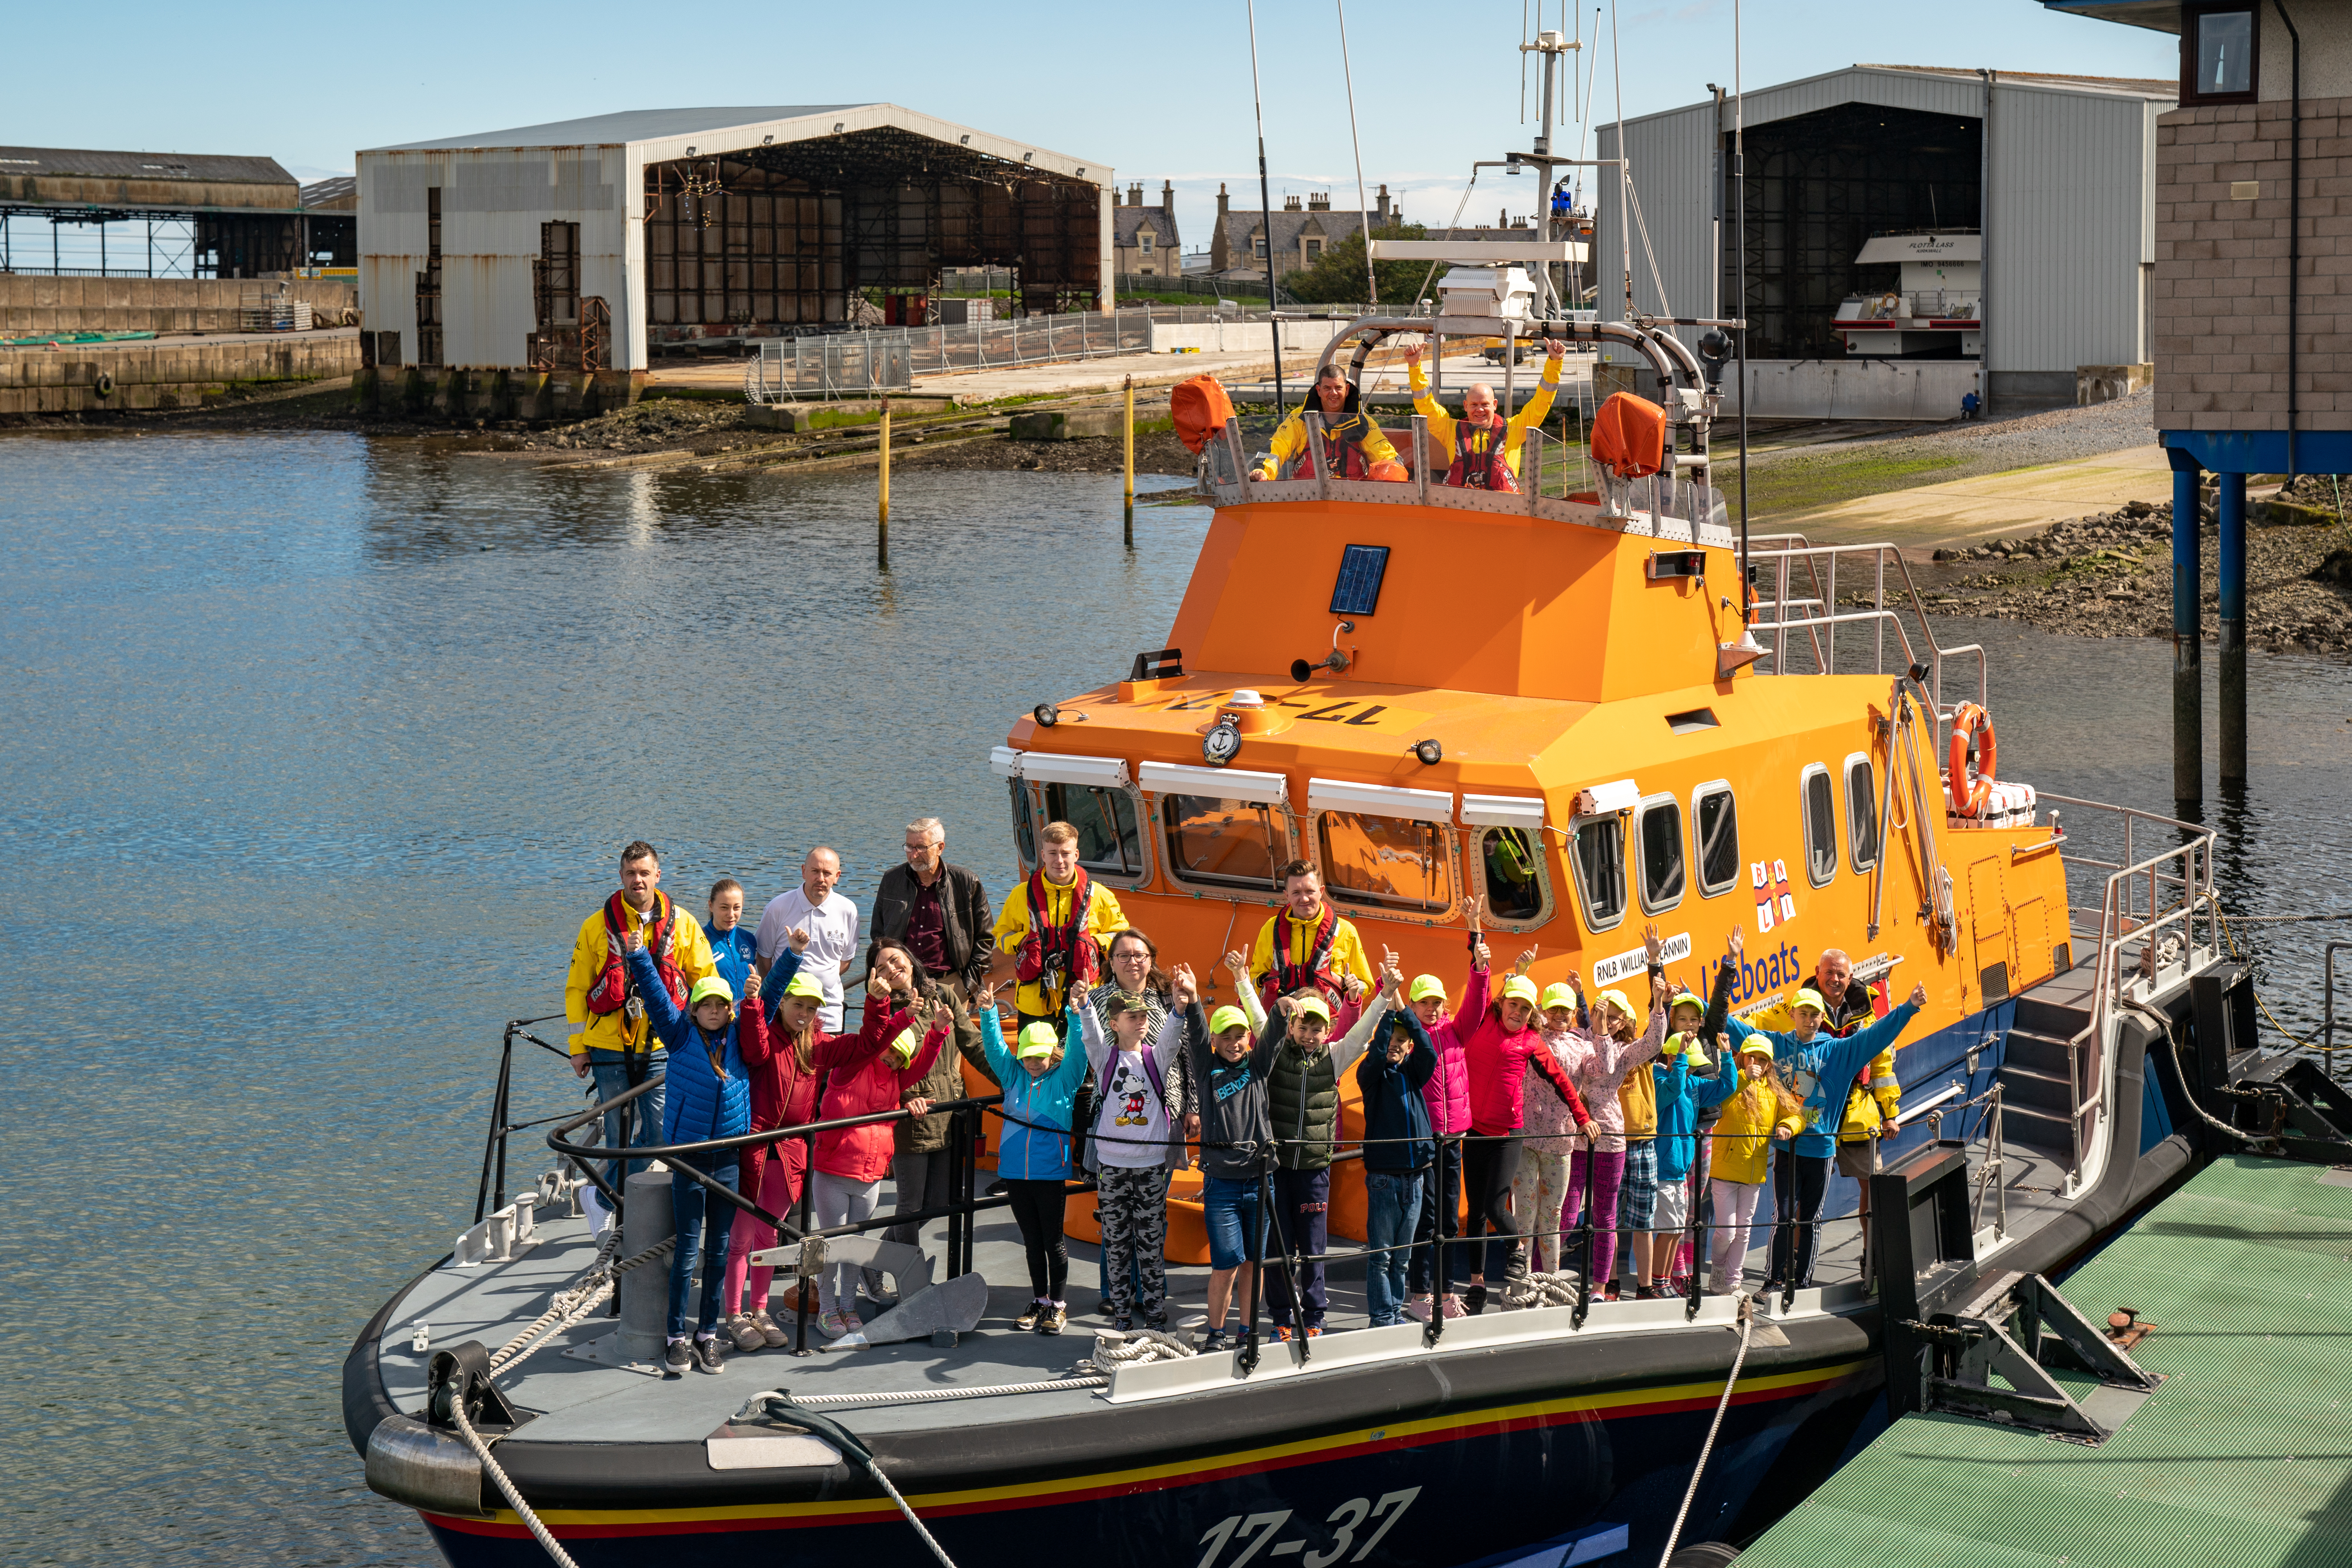 This is the Friends of Chernobyl Children visiting the Lifeboat during their months stay in Moray, Scotland.